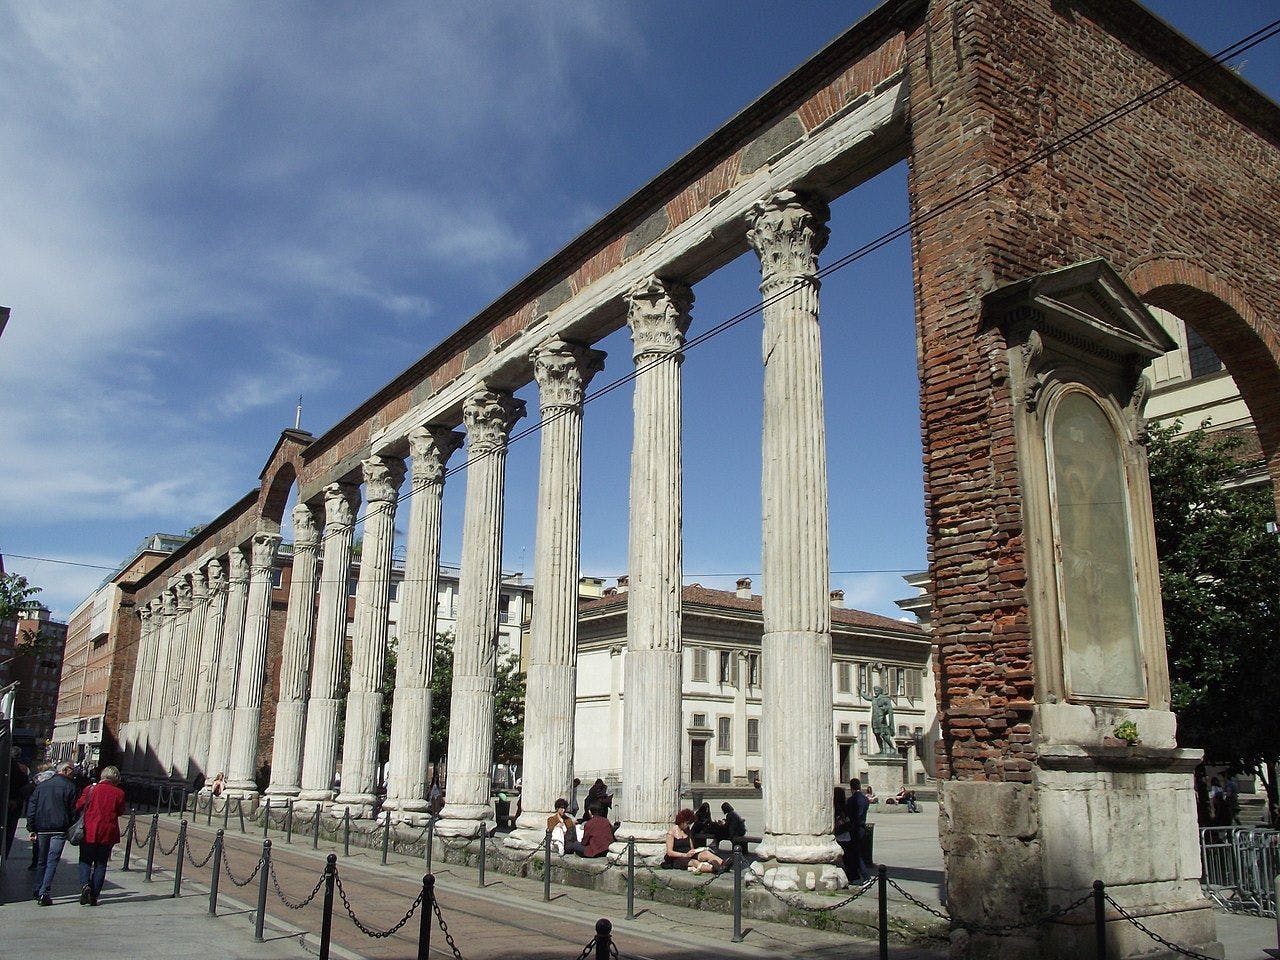 View of the colonnade (by Parsifall, CC BY-SA 4.0 via Wikimedia Commons)